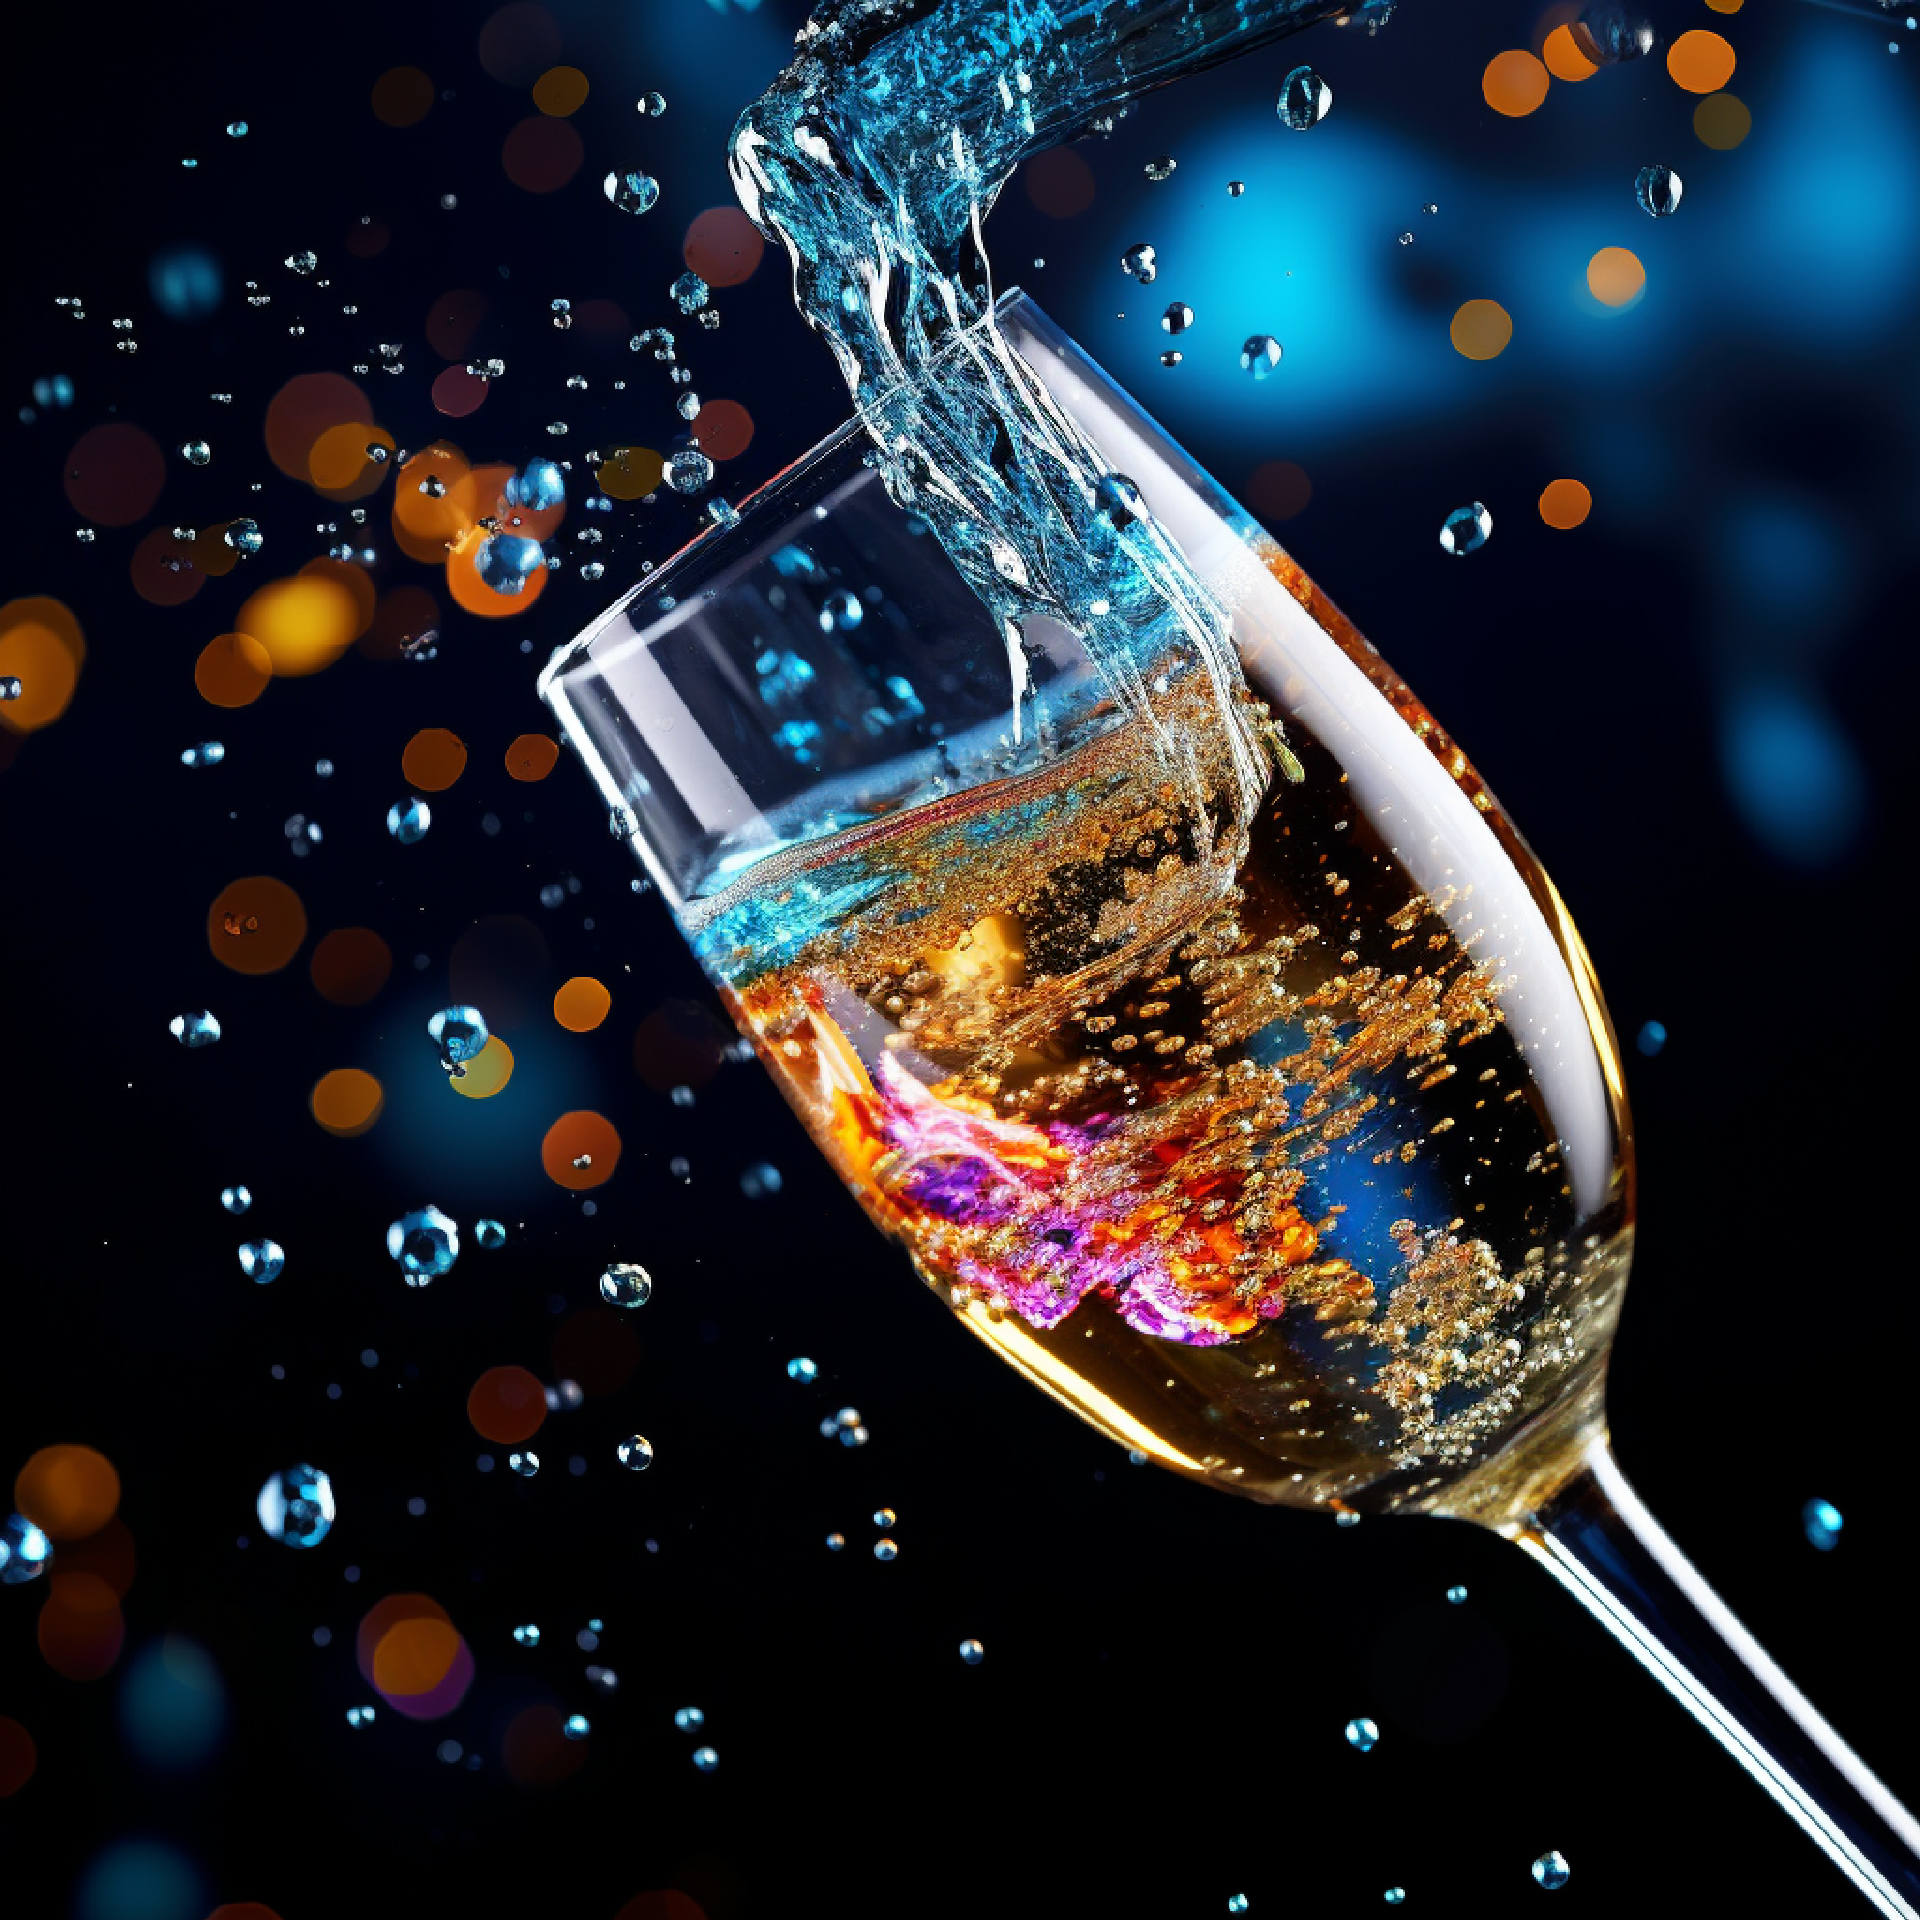 a close-up of champagne bubbles rising to the surface in a flute, capturing the moment of aeration. The scene combines the elegance of a high-end celebration with a hint of scientific curiosity. Encyclopedia Wines